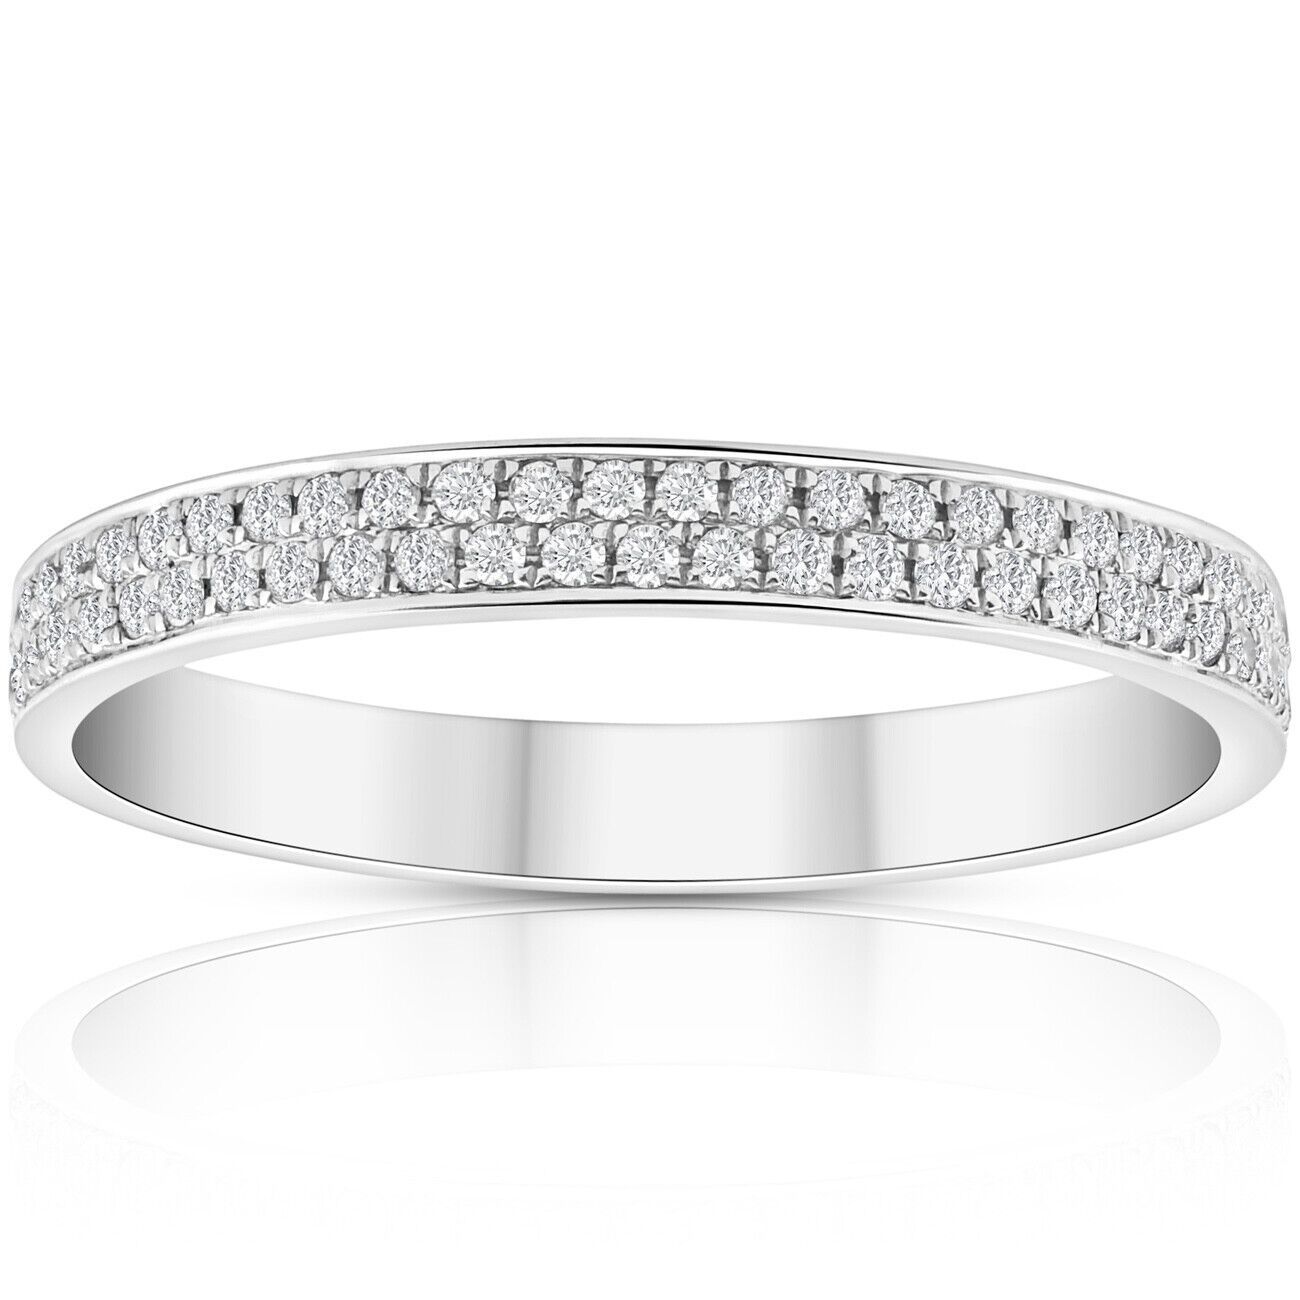 1/2ct Pave Double Row Eternity Ring 18k White Gold | Ebay With Regard To Double Row Eternity Rings (View 22 of 25)